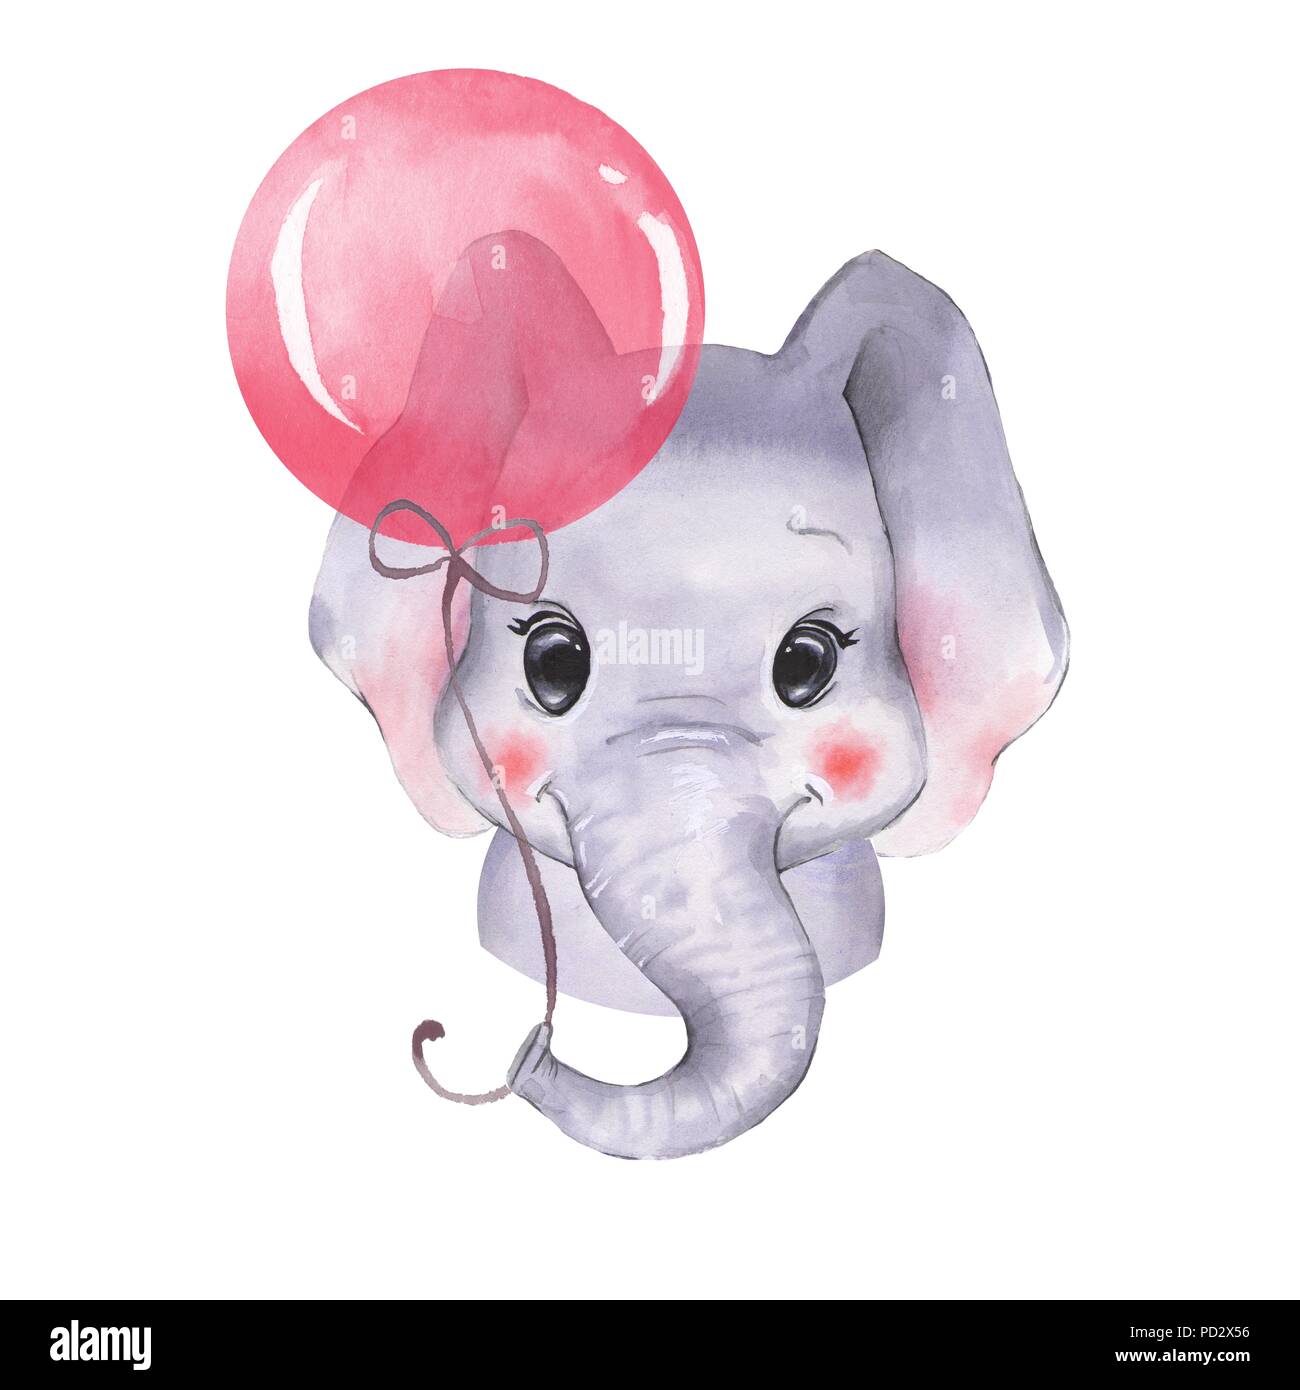 Elephant With Balloon High Resolution Stock Photography and Images - Alamy